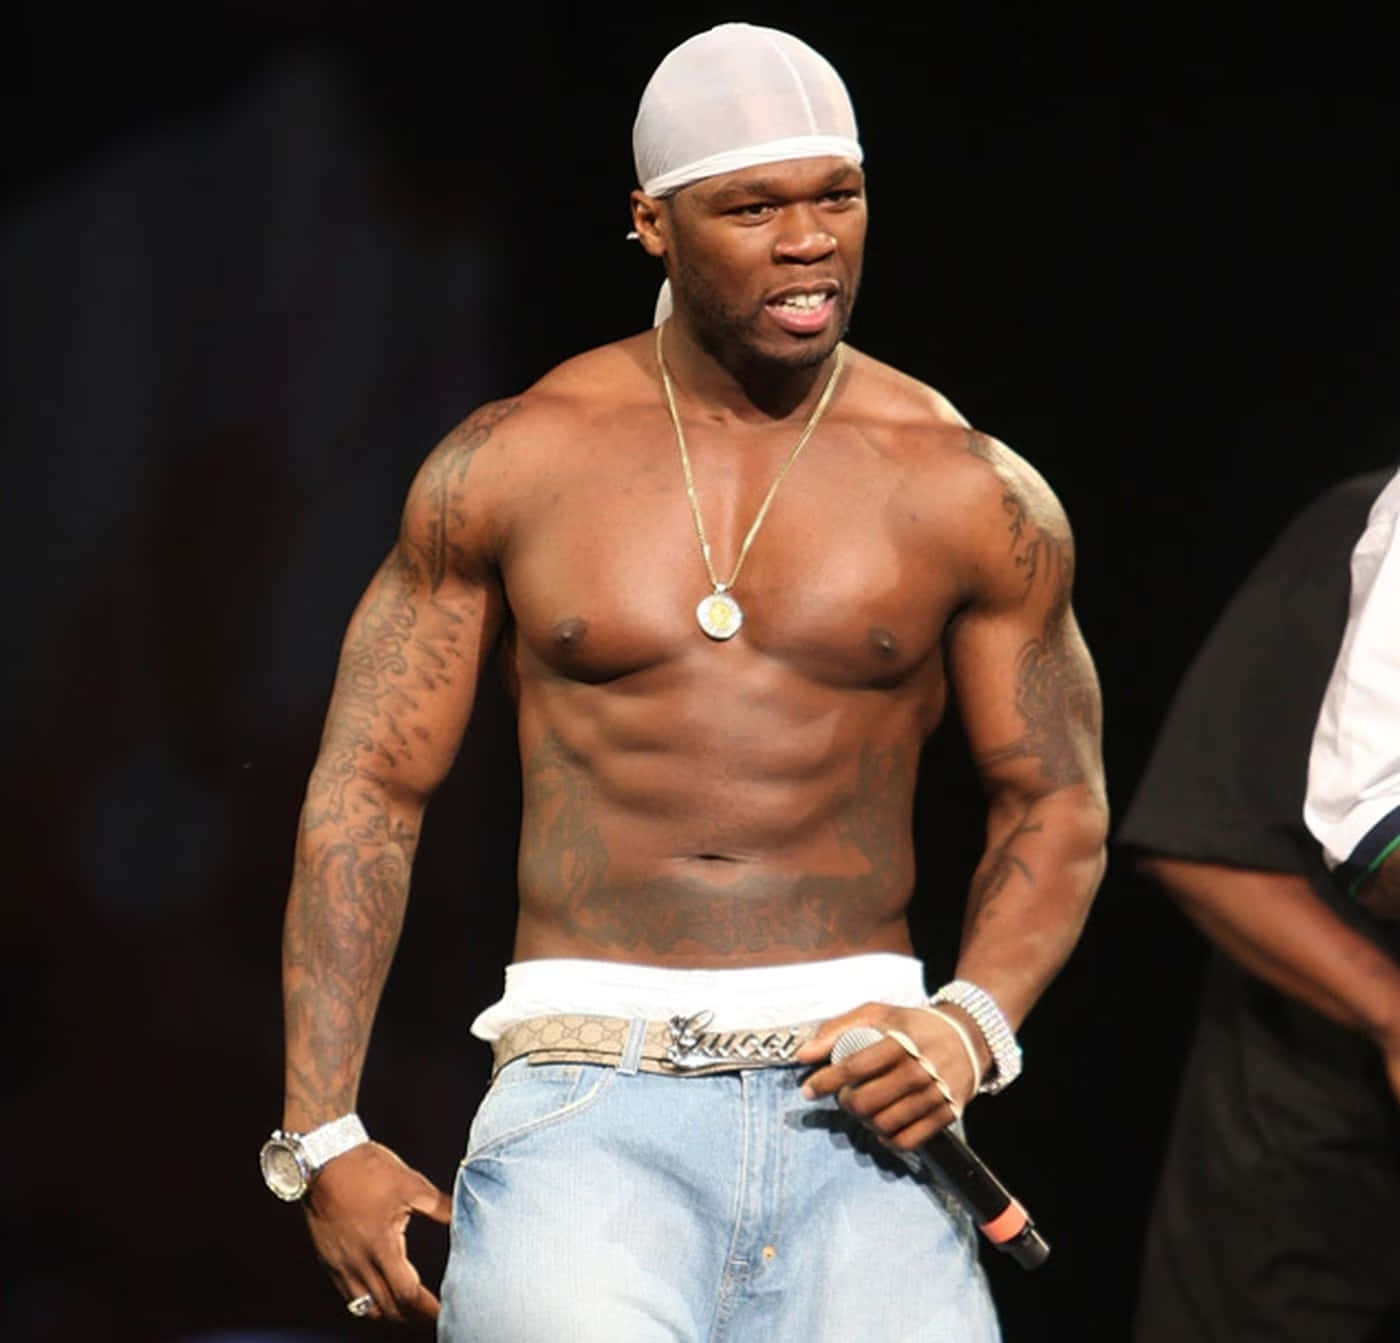 50 Cent hits the stage